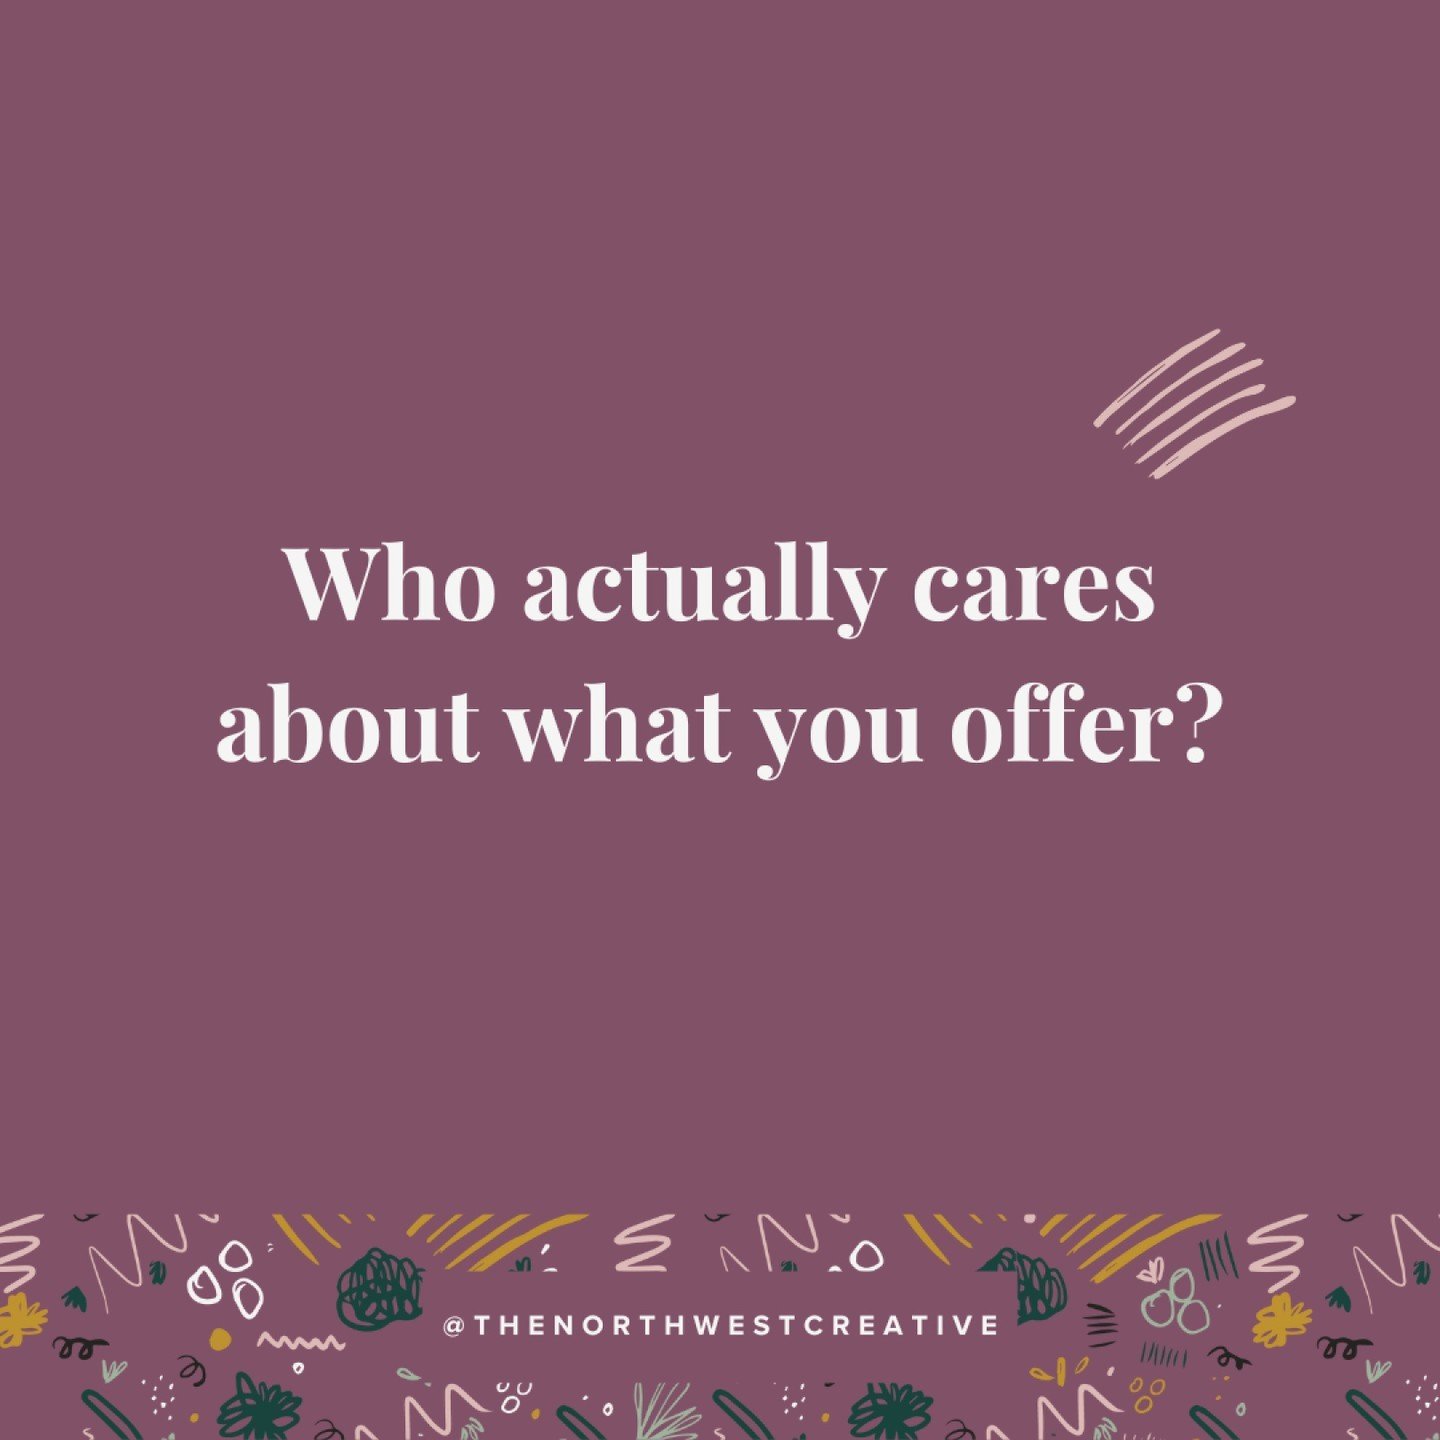 🧐 Could you tell me right now who your ideal customer is? Who actually cares about what you offer?

Great marketing requires a deep understanding of who will really buy what you're selling.

Your audience matters. If you aren't thinking about them a